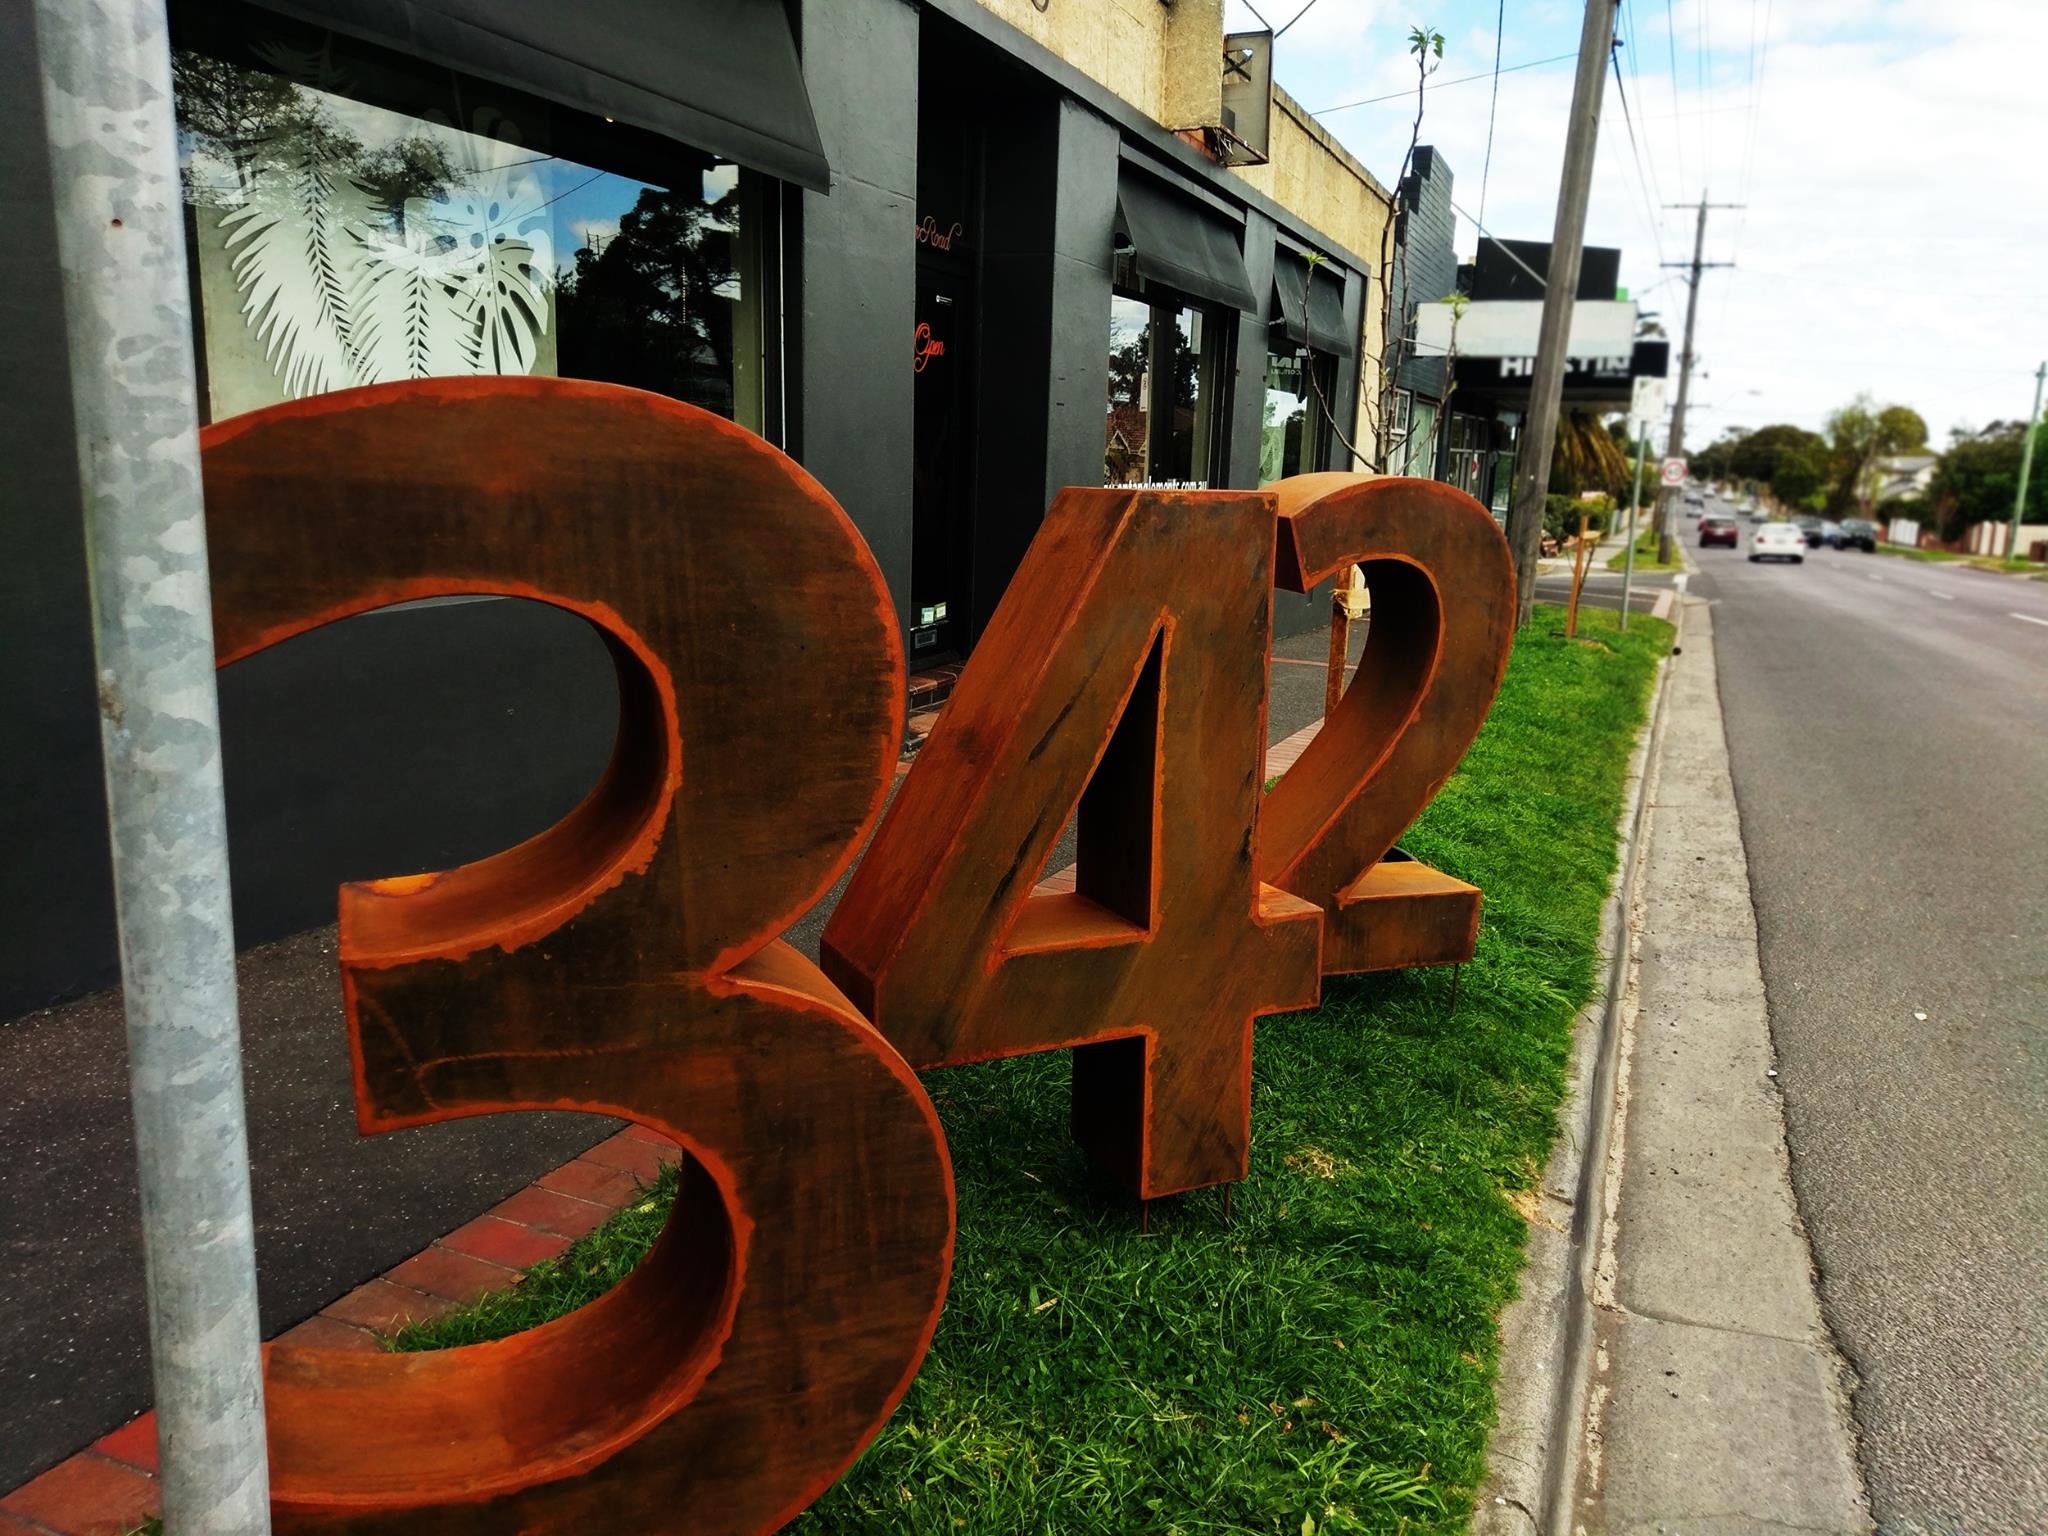 Large 3d House Numbers